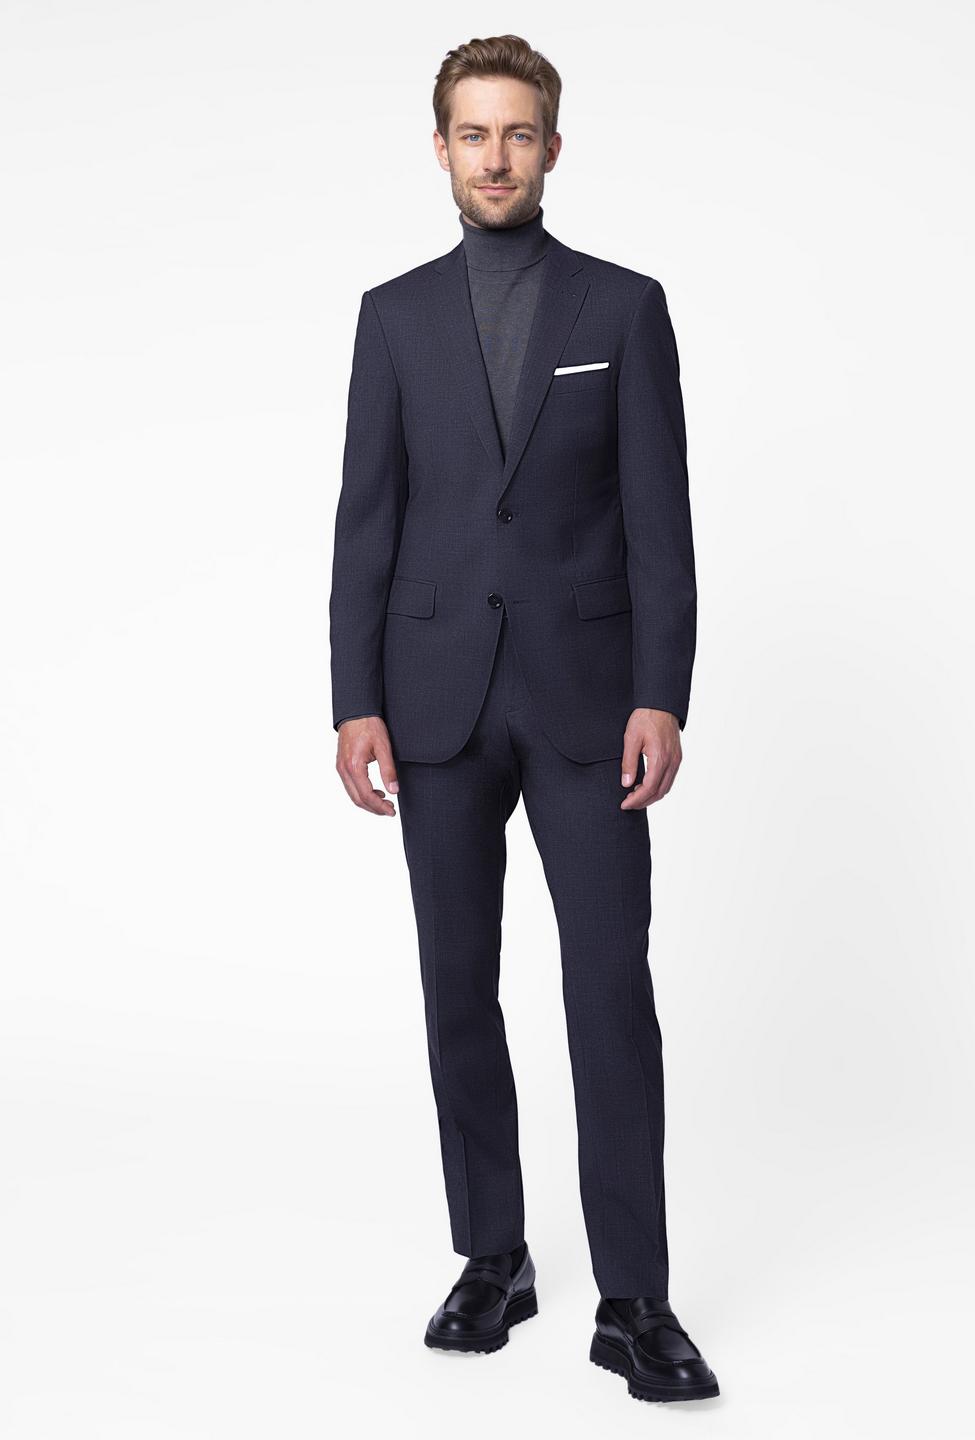 Gray suit - Howell Solid Design from Luxury Indochino Collection